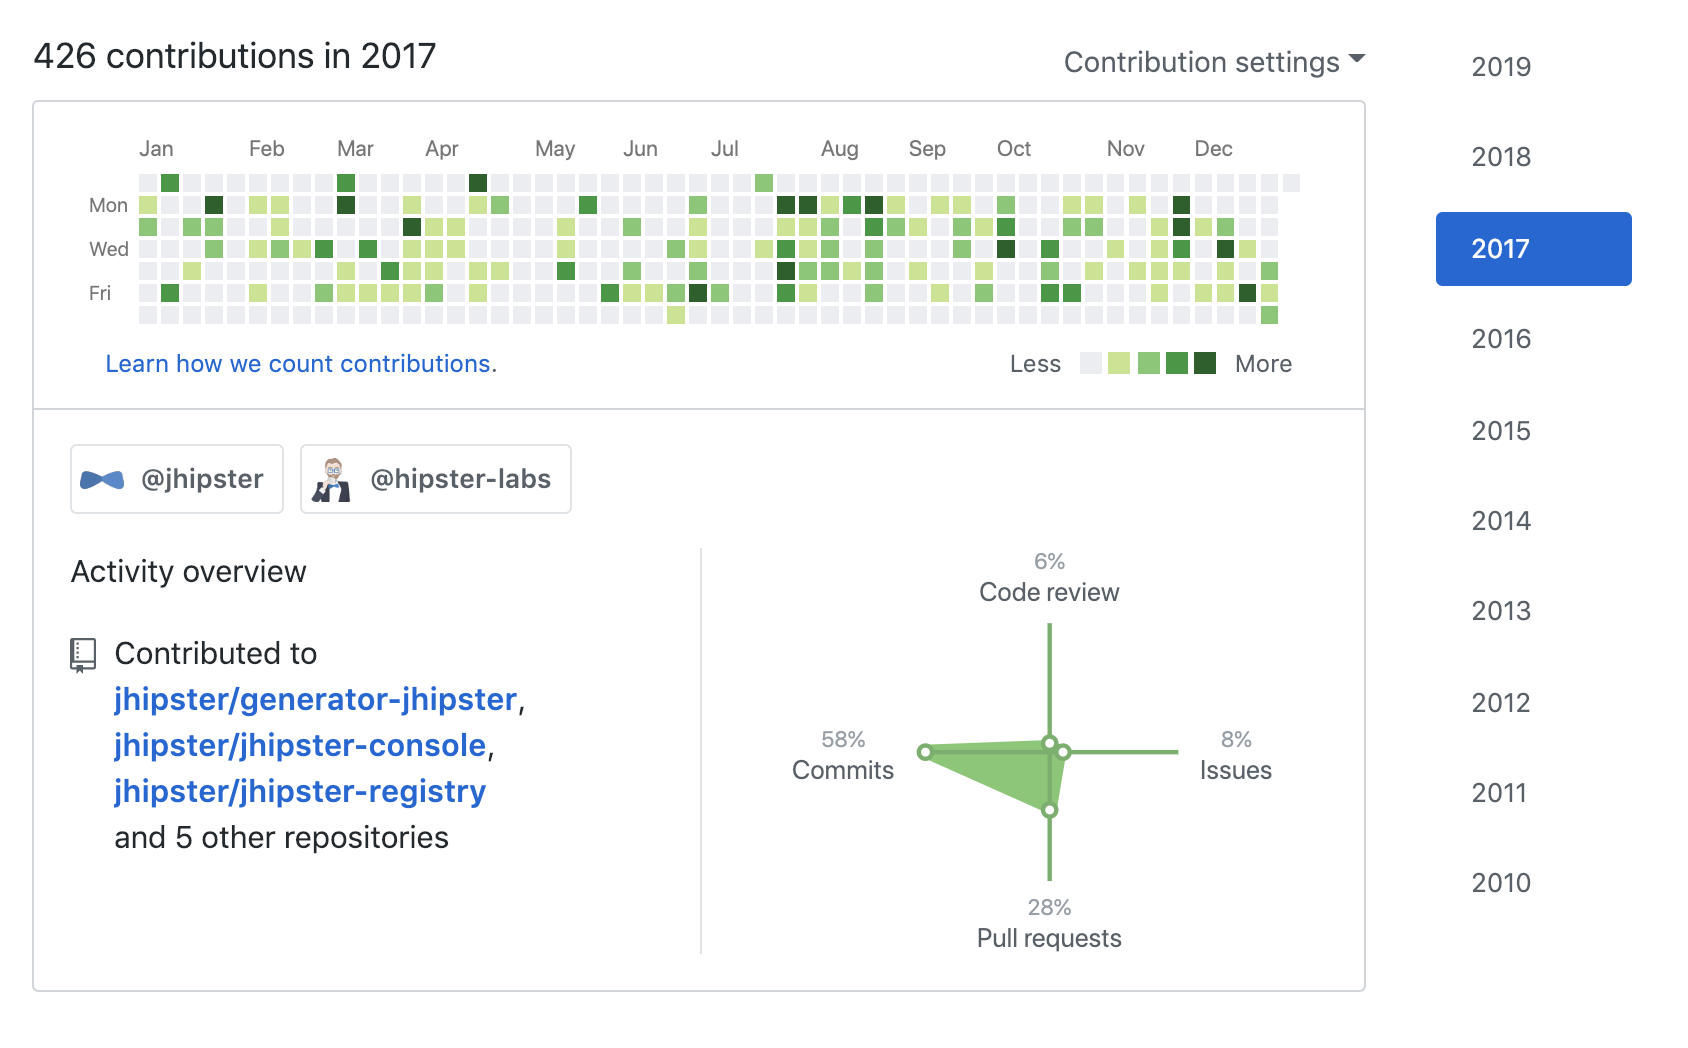 My contributions to open source in 2017